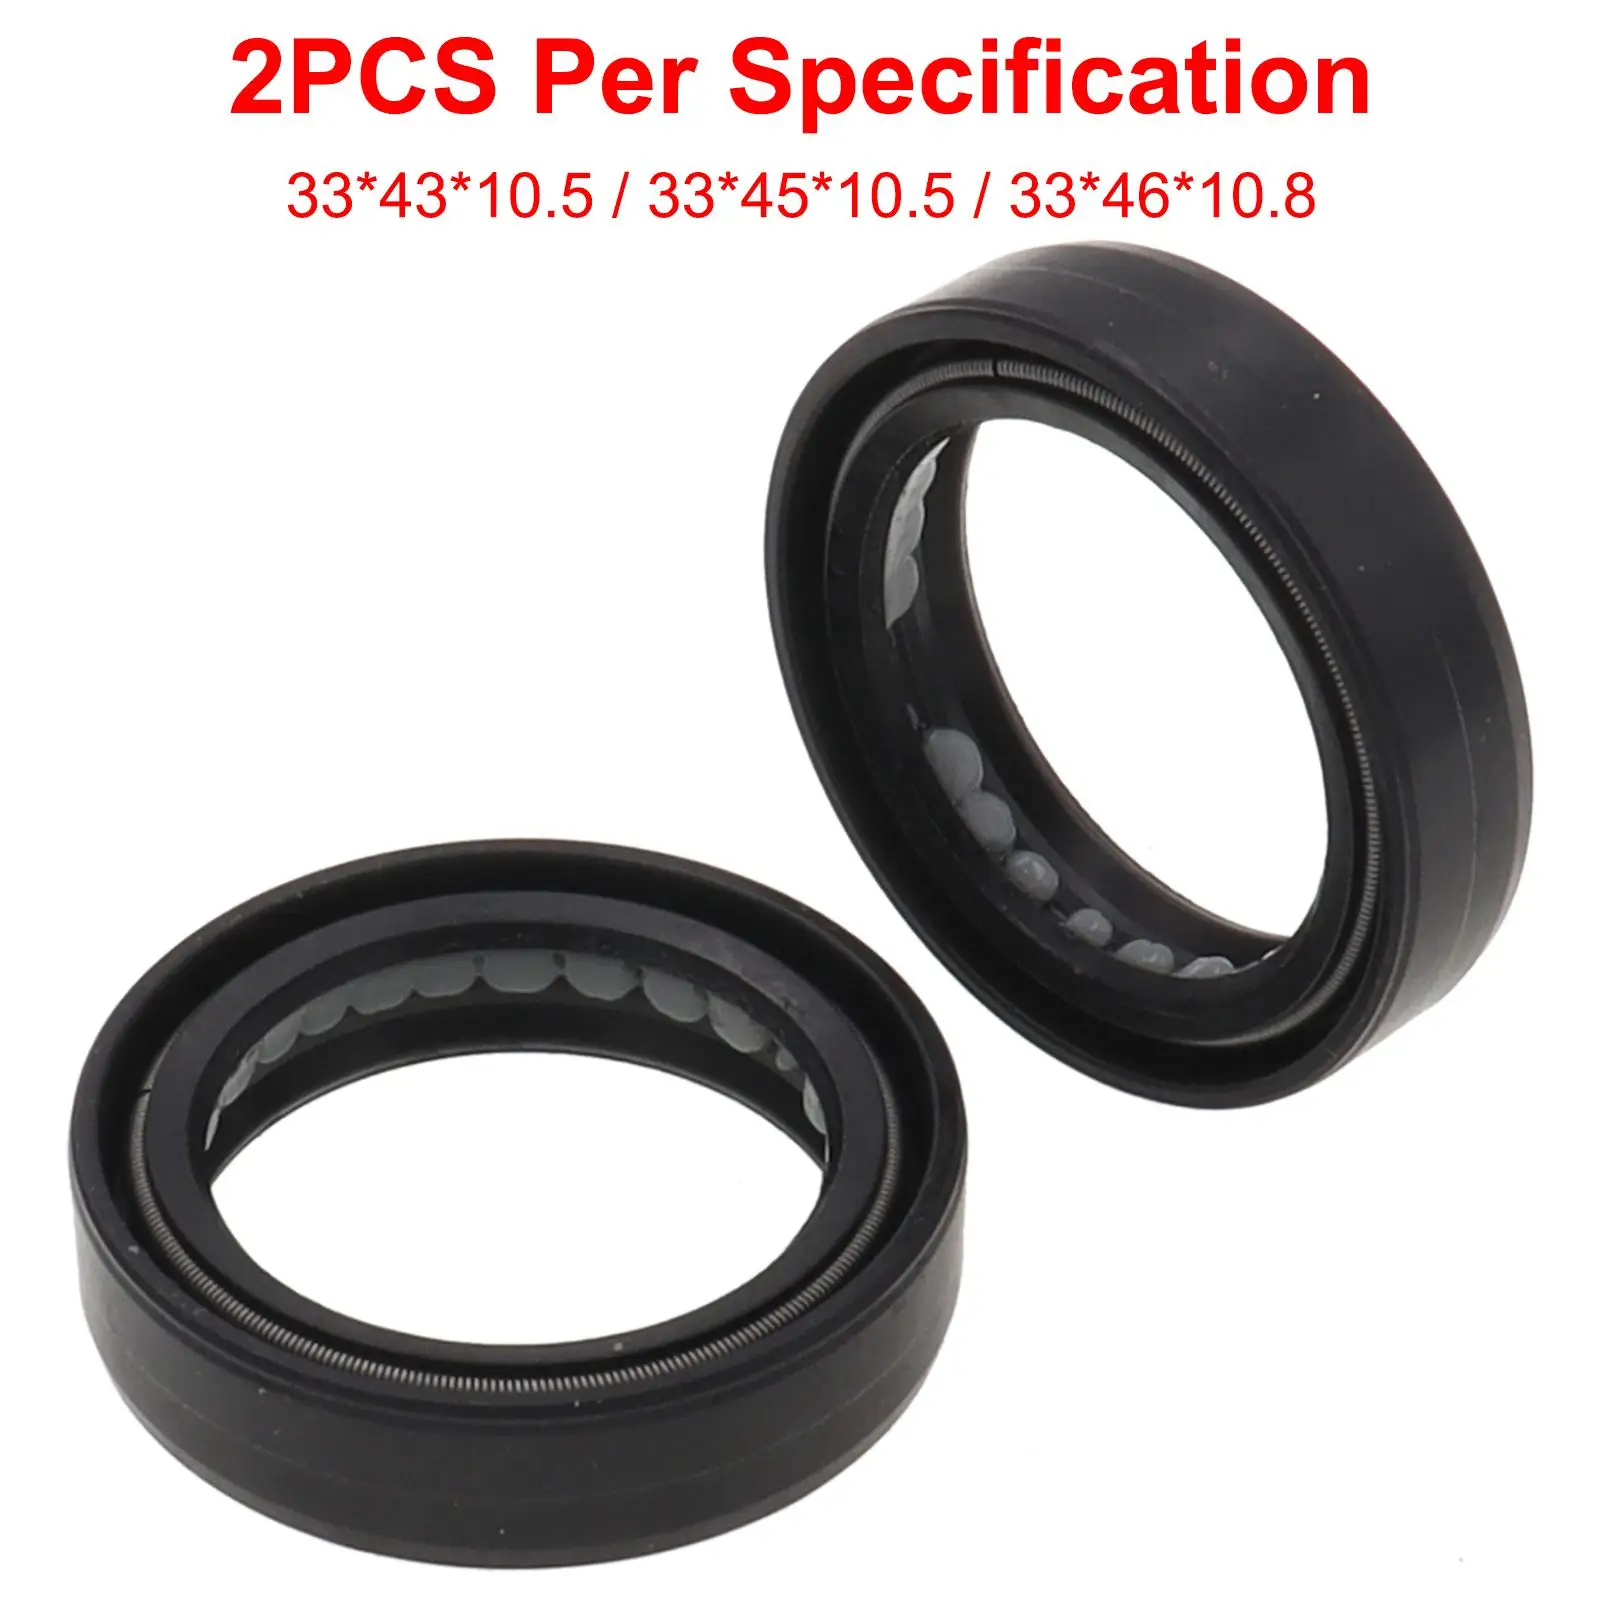 Motorcycle Front Fork Damper Oil Seal Durable for Motorbike Replaces